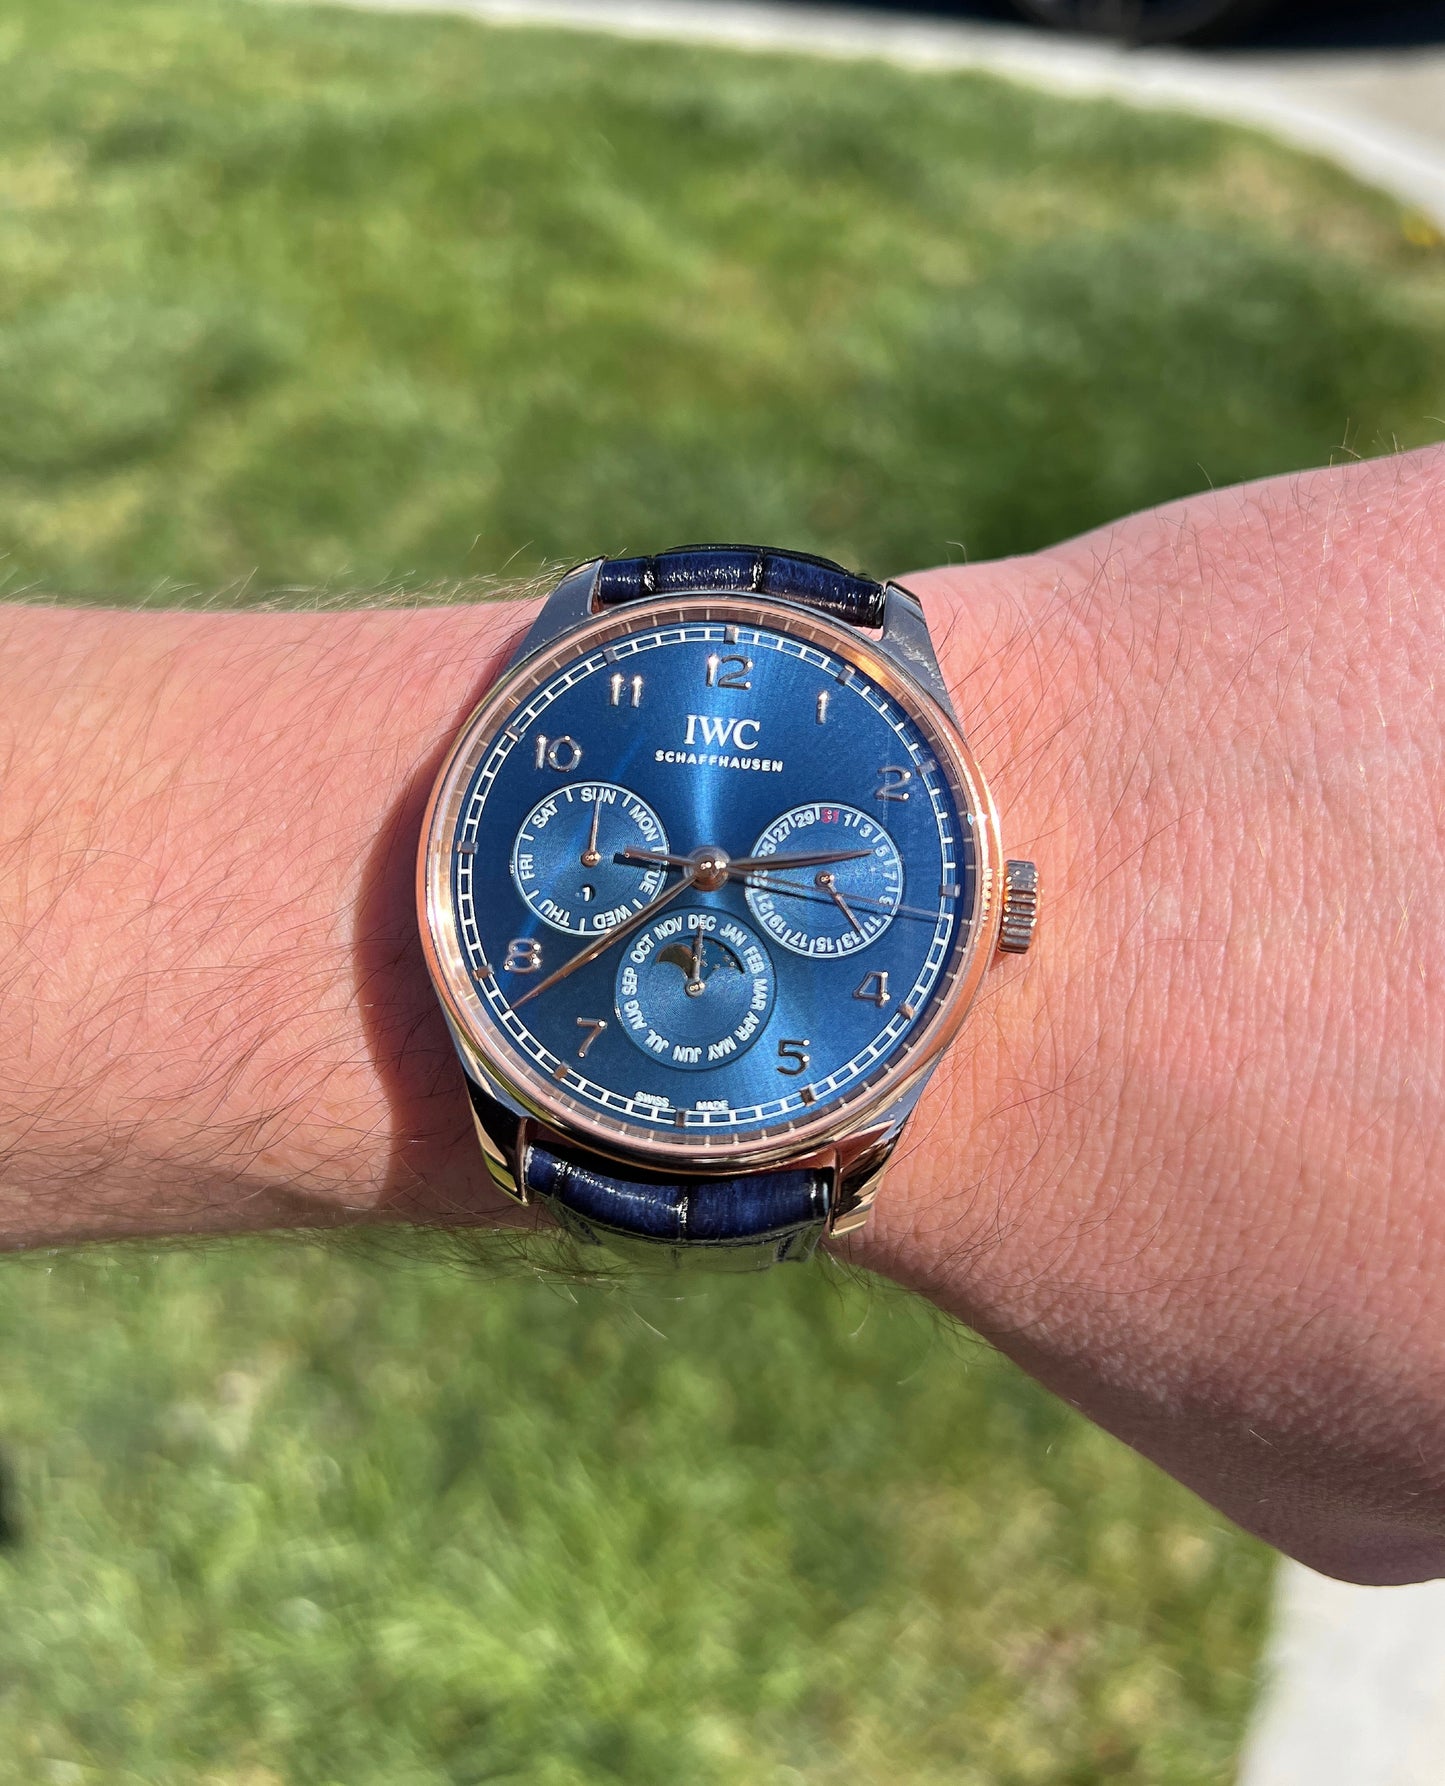 IWC Men's Portugieser Perpetual Calendar Rose Gold 42mm Blue Chronograph Dial Watch Reference #: IW344205 - Happy Jewelers Fine Jewelry Lifetime Warranty